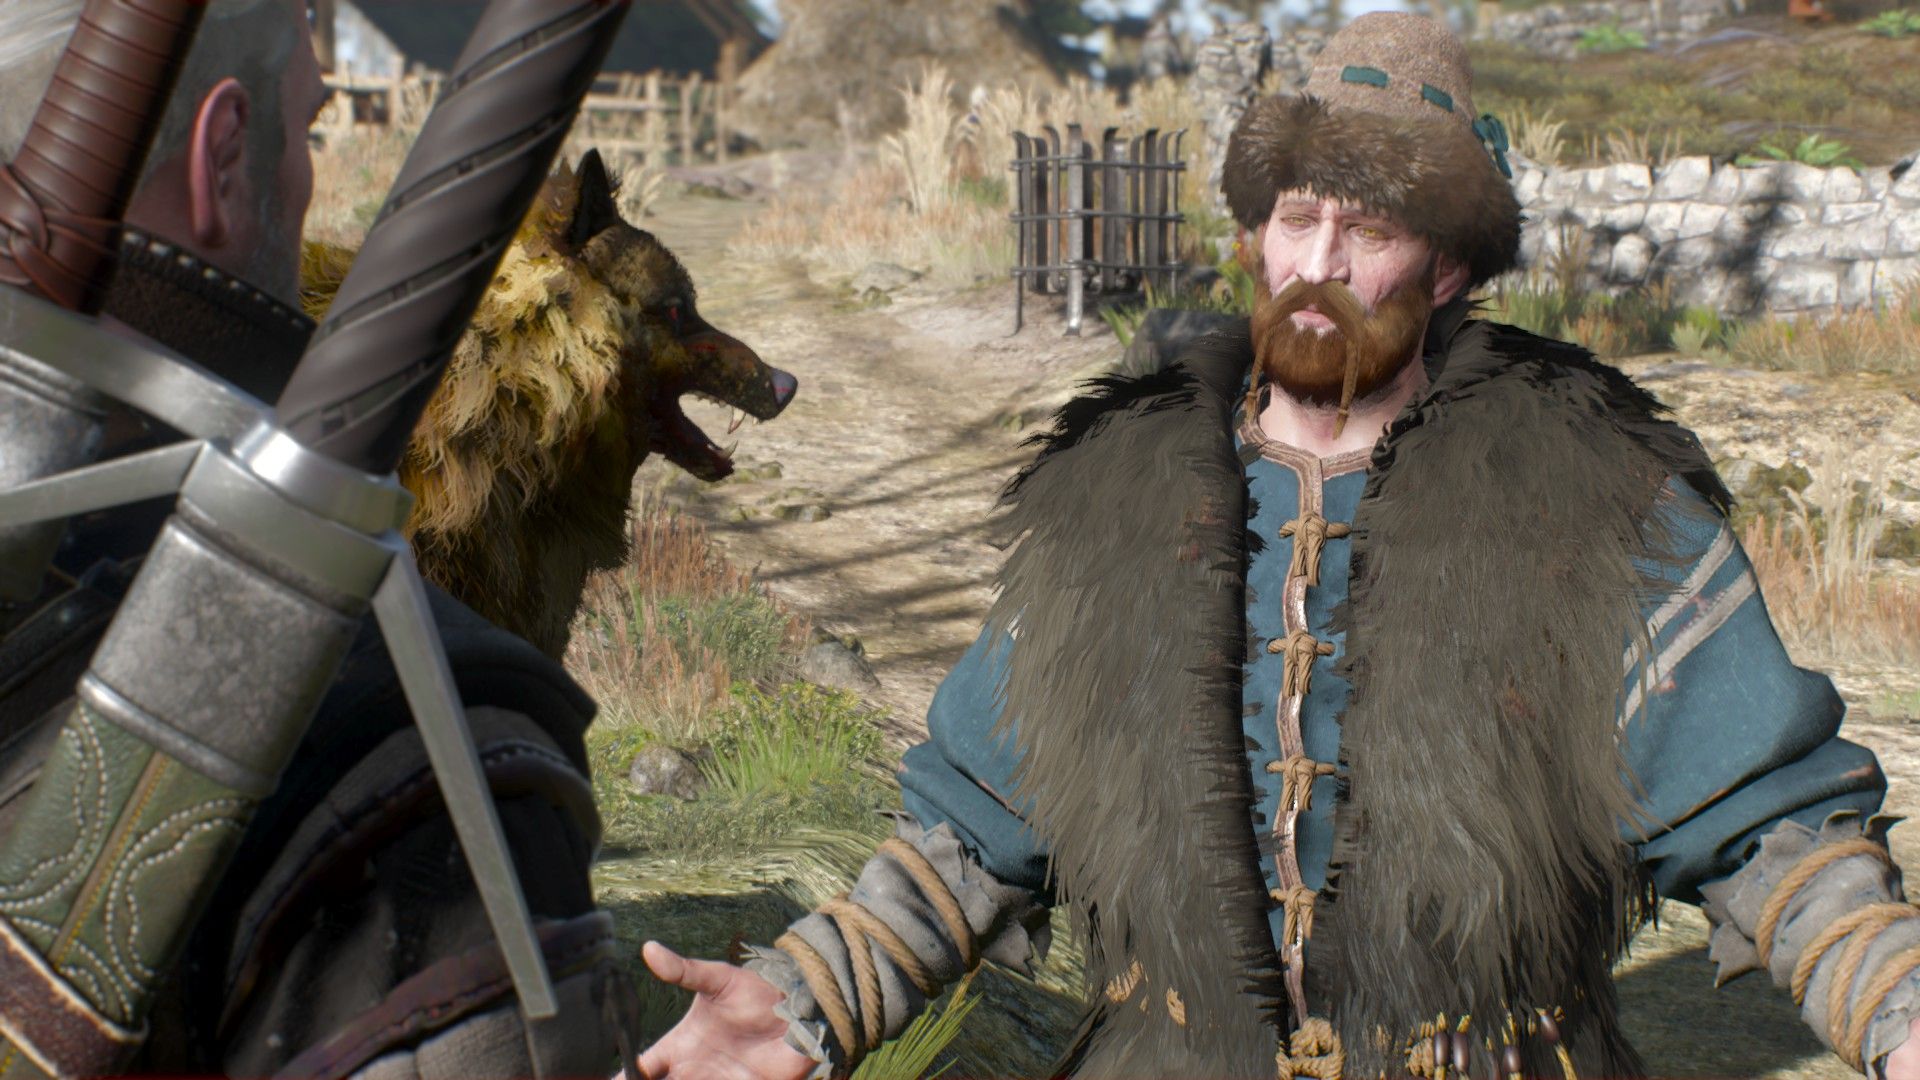 A fur-clad Skelliger spreads his arms and talks to Geralt in the village.